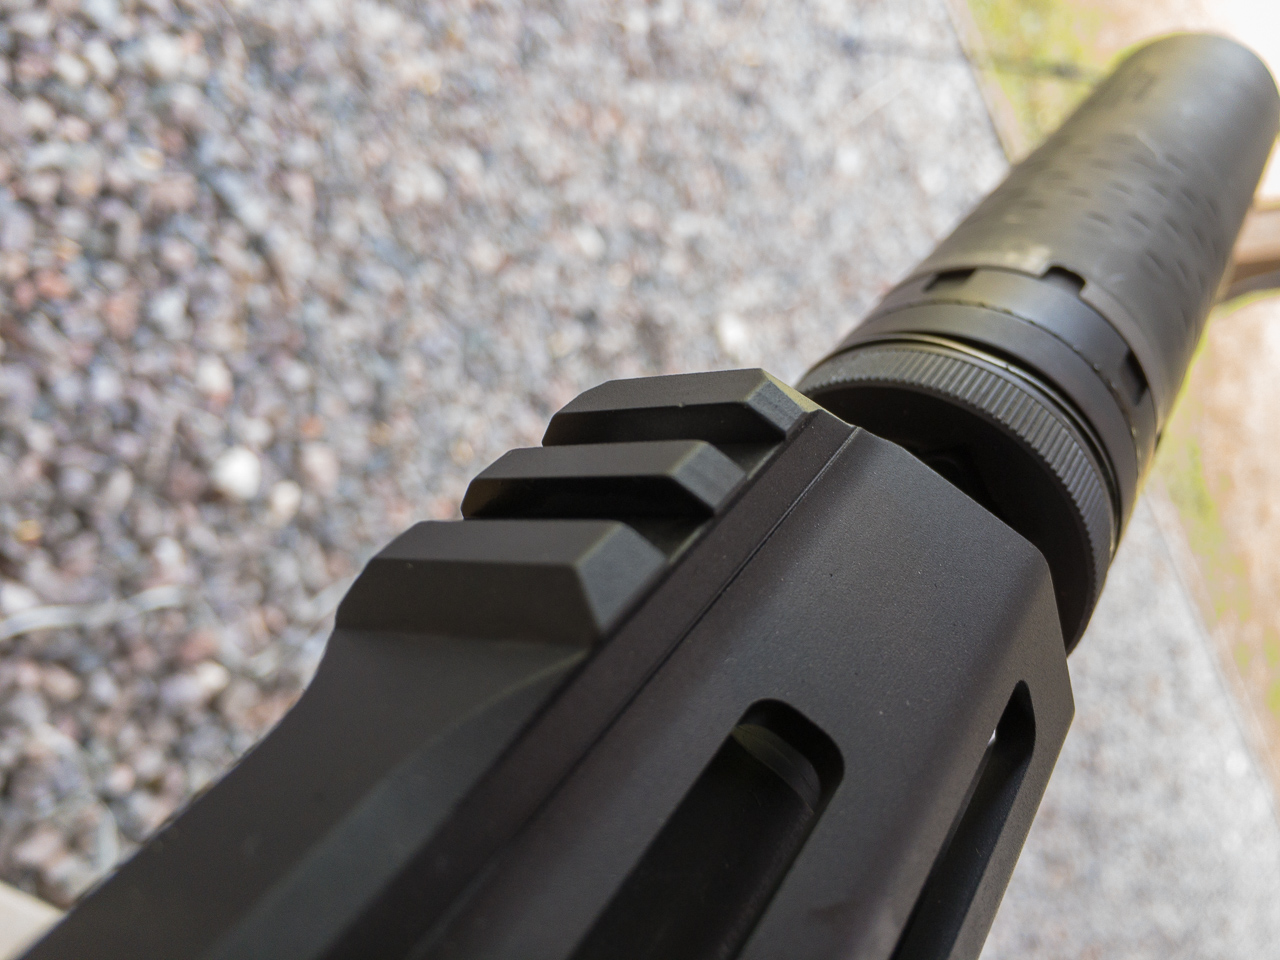 Most of the top handguard surface is smooth. There are short rail segments up front for back up iron sights.